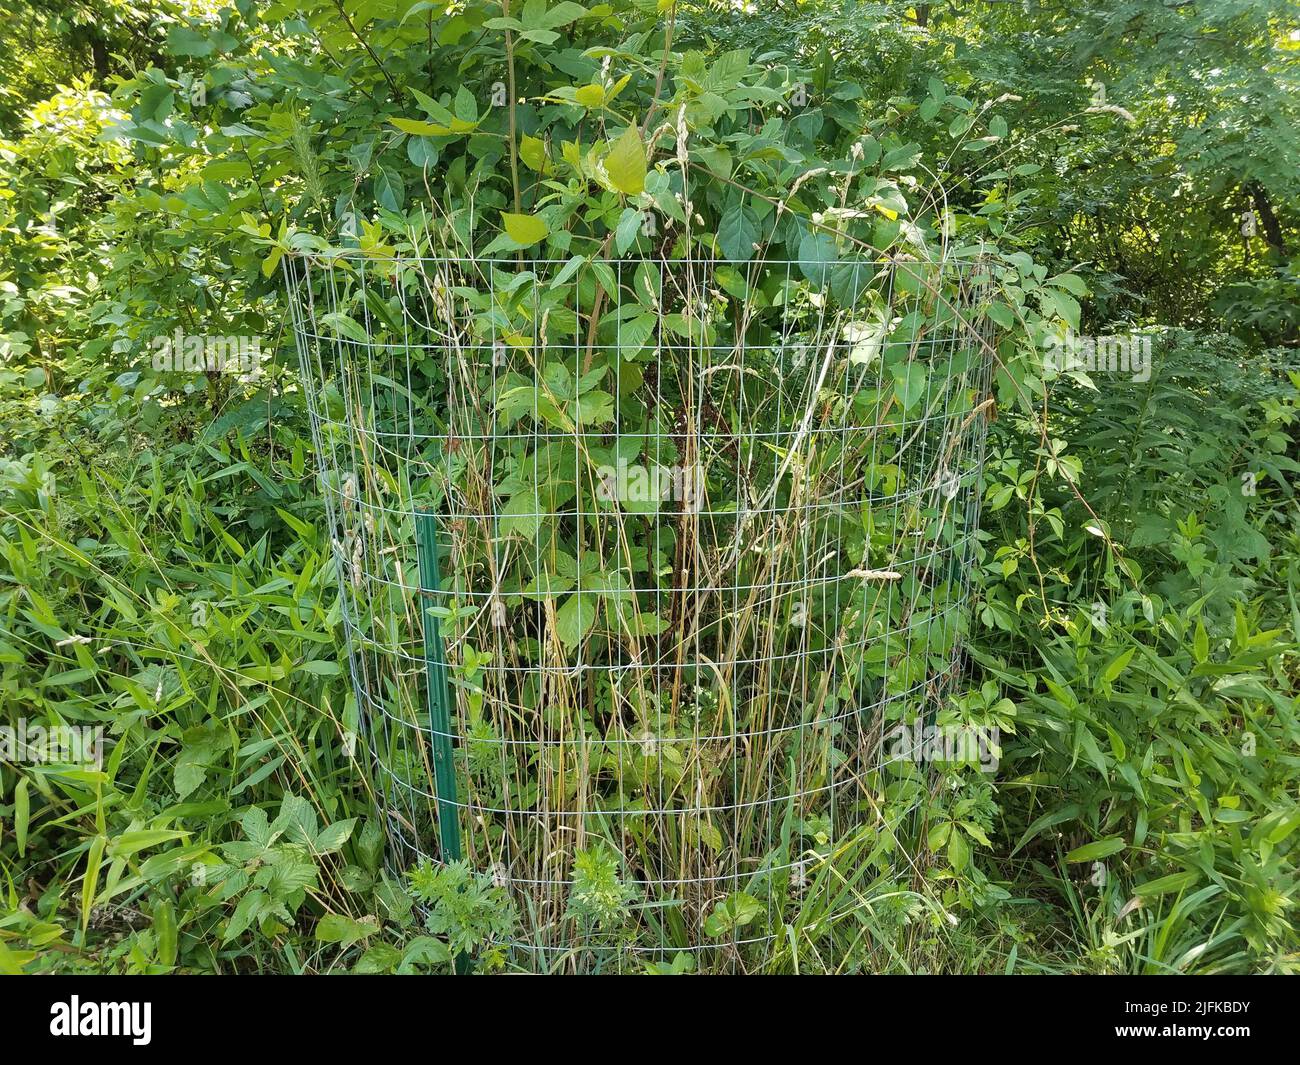 mteal cage around trees and many green plants. Stock Photo